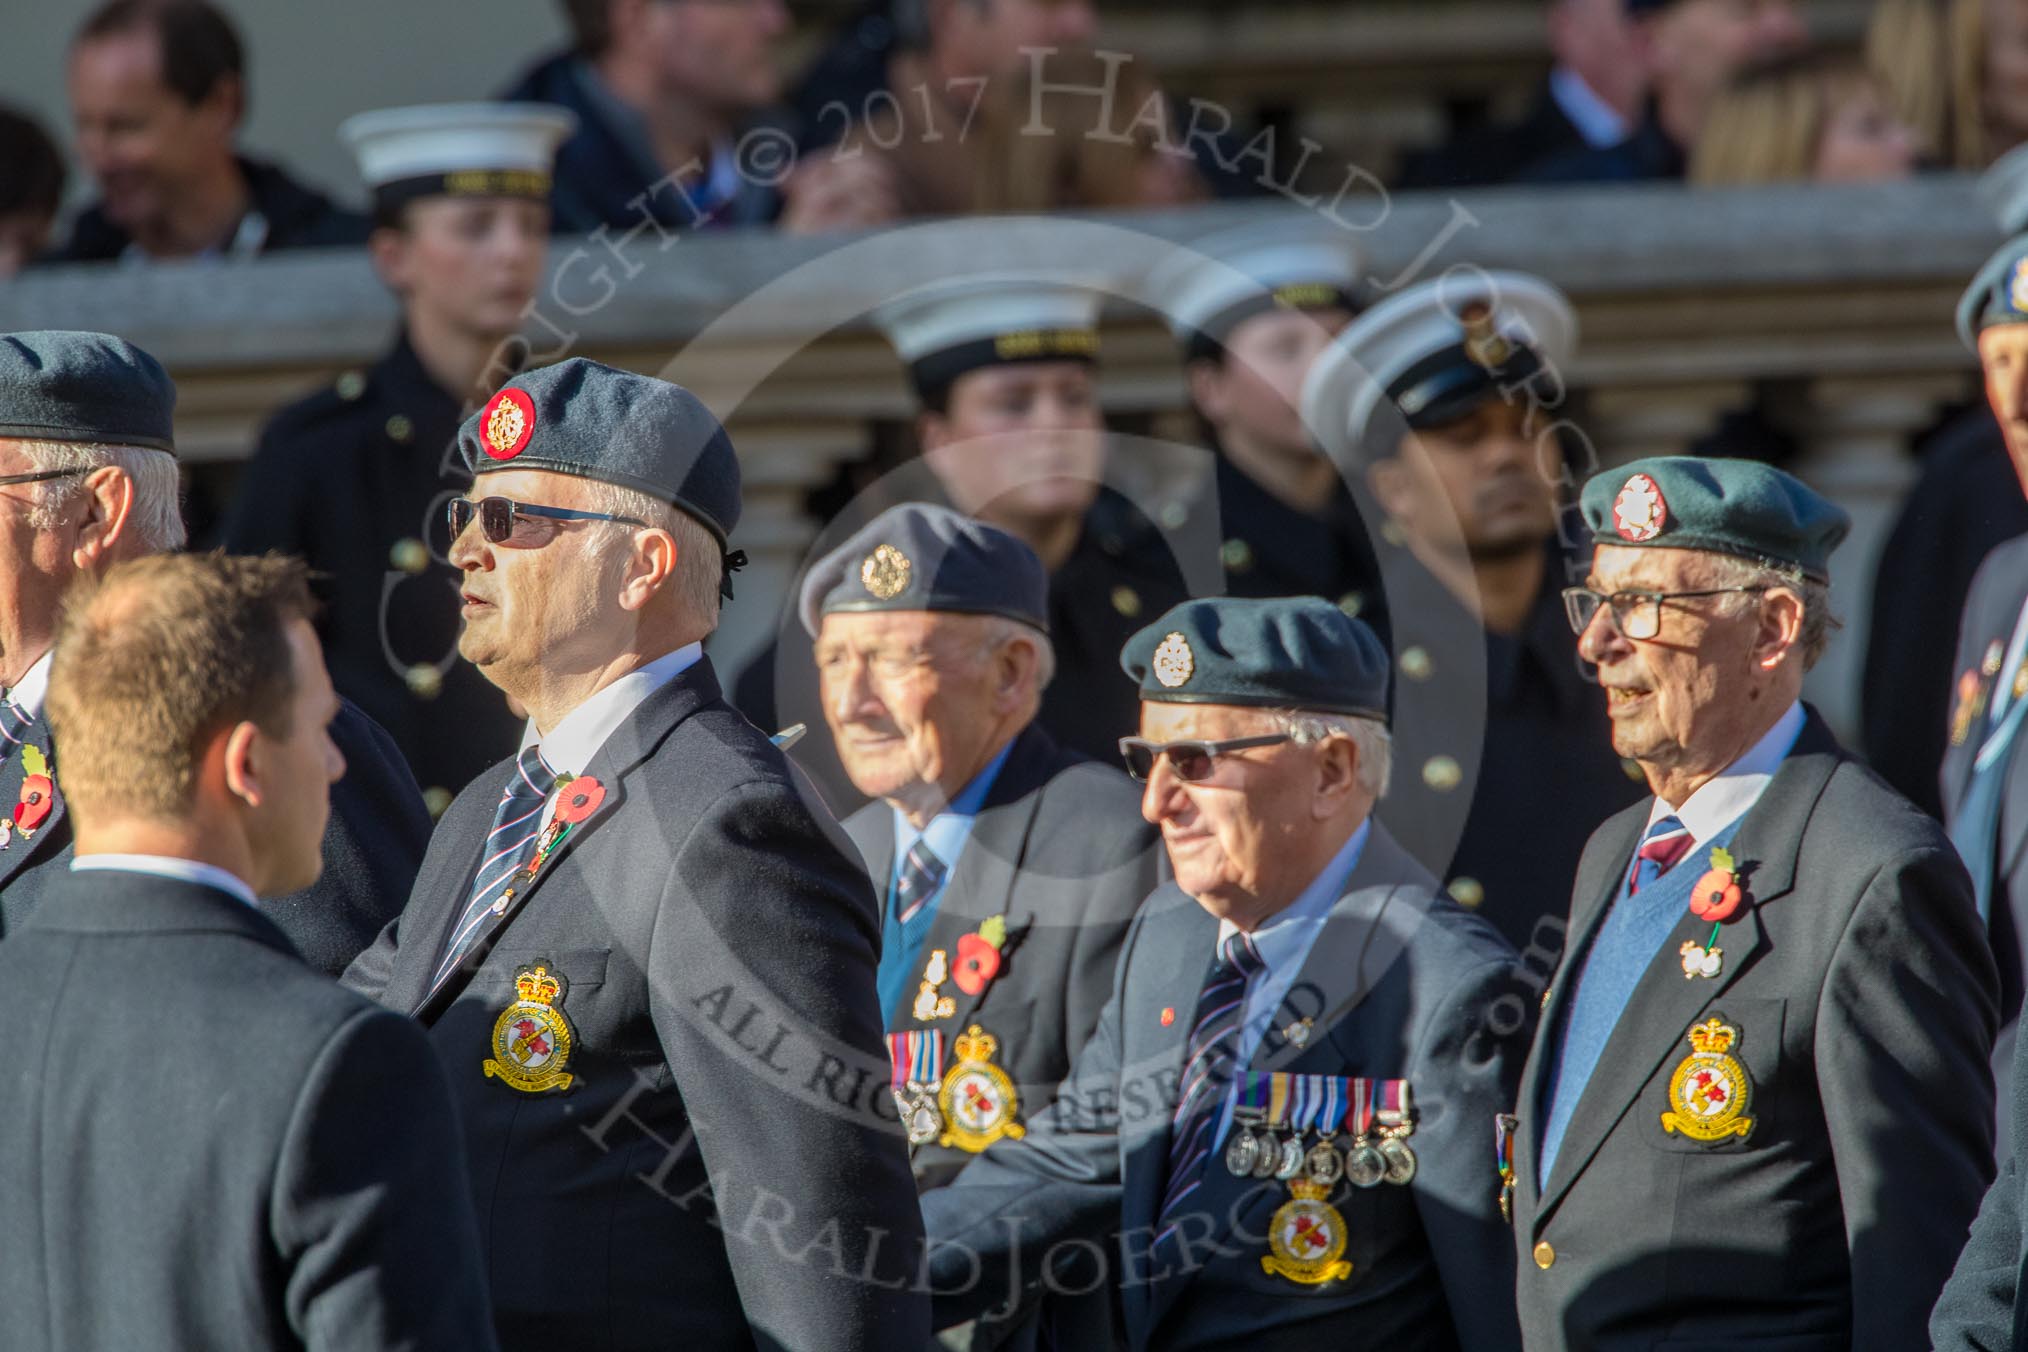 RAFDFSA (Group C11, 22 members) during the Royal British Legion March Past on Remembrance Sunday at the Cenotaph, Whitehall, Westminster, London, 11 November 2018, 12:16.